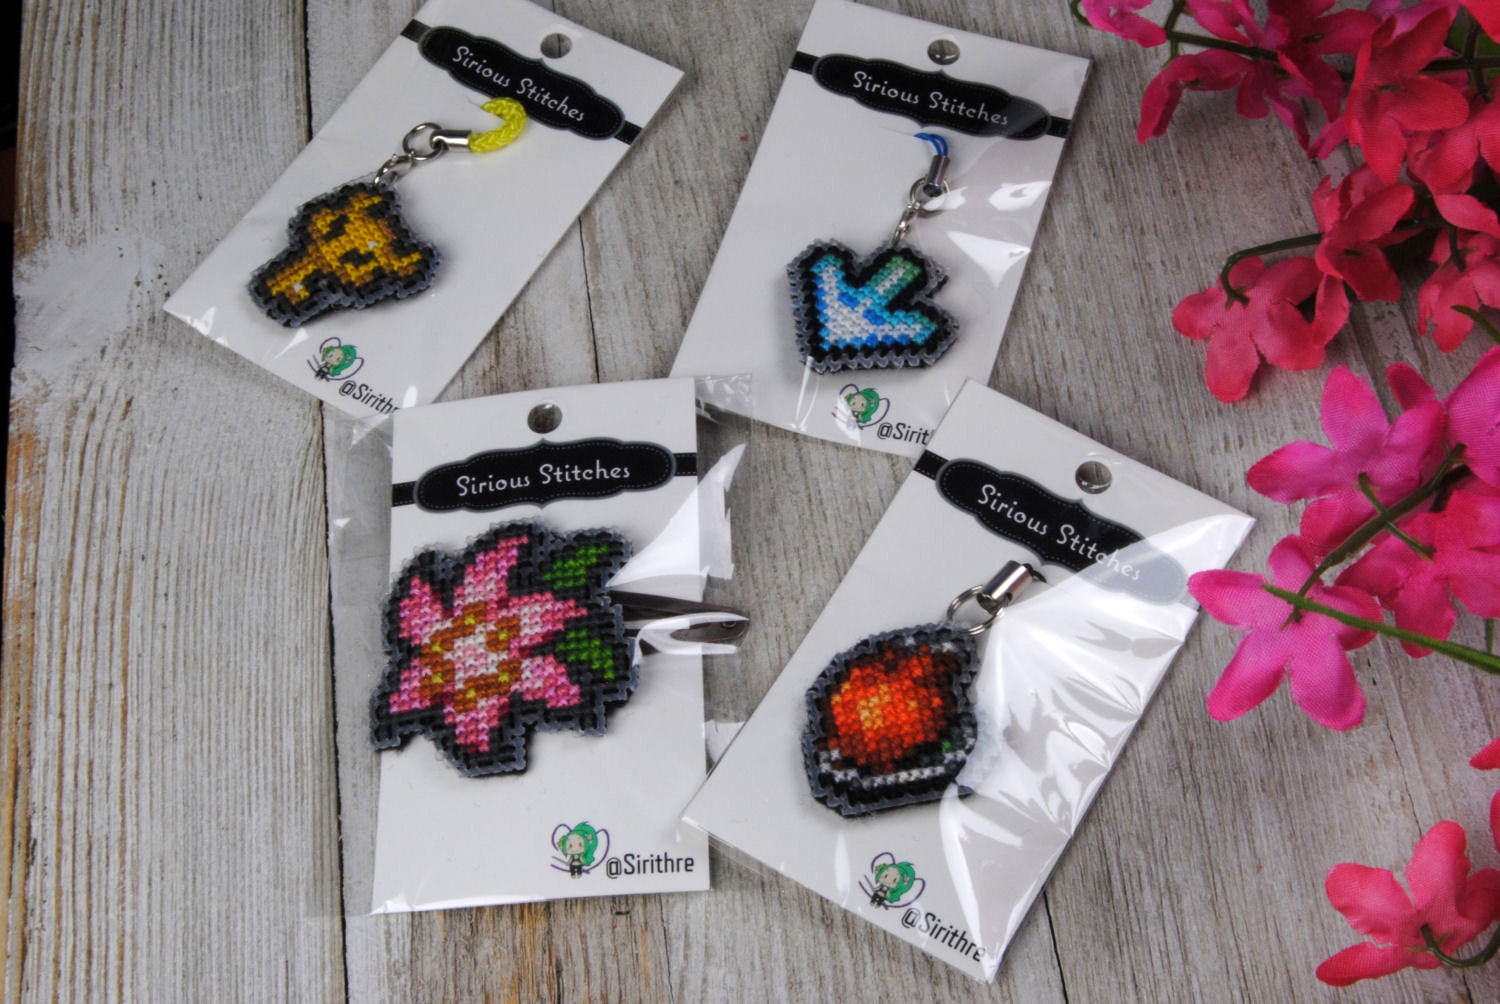 Shop Small Businesses for your Cross Stitch Accessories! ⋆